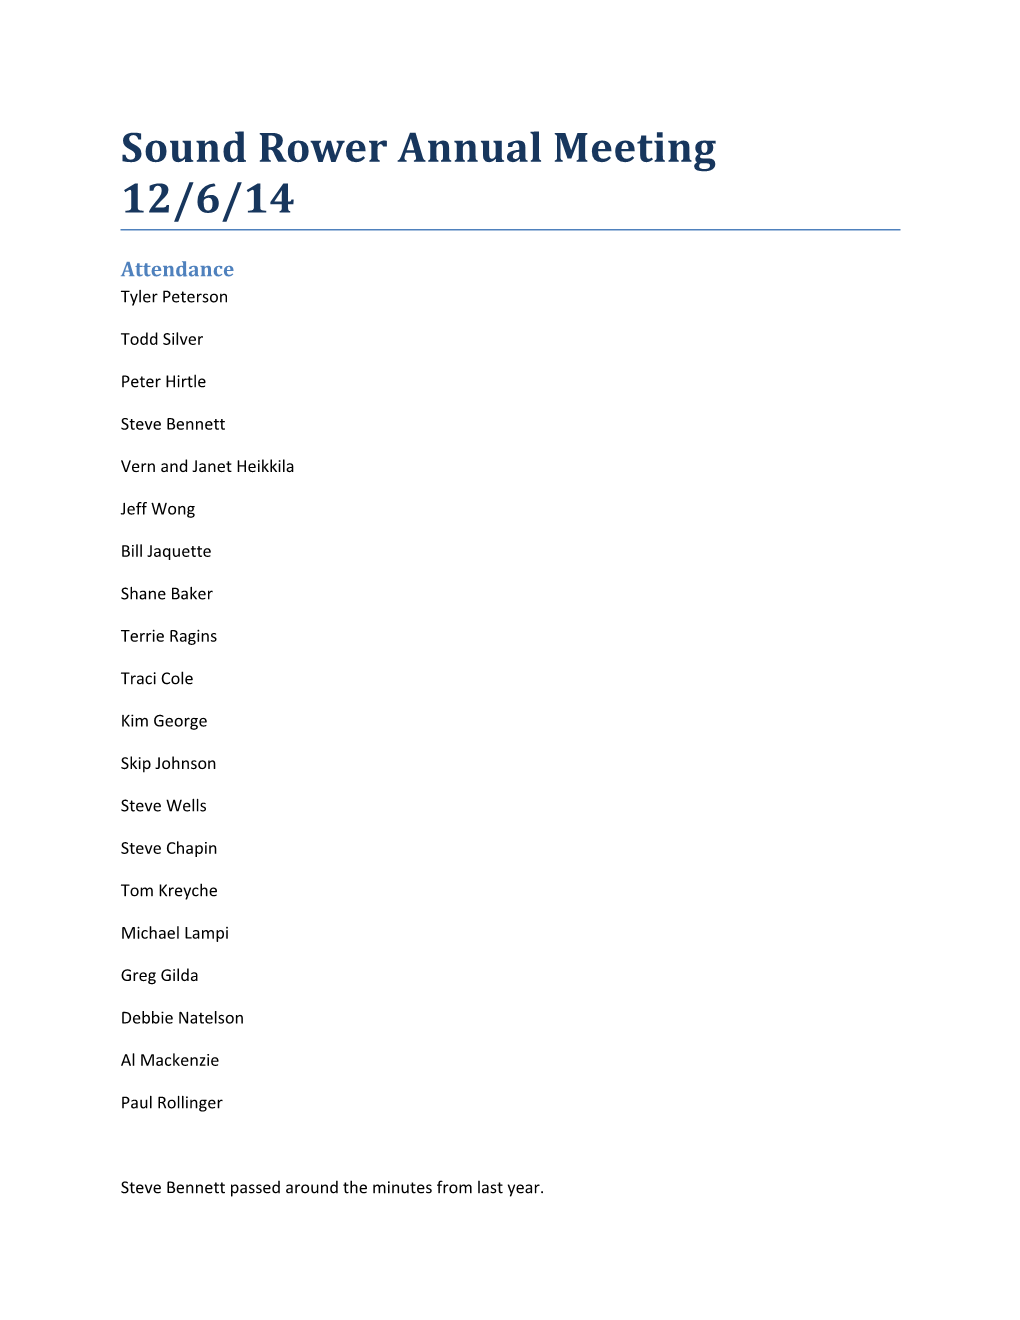 Sound Rower Annual Meeting 12/6/14